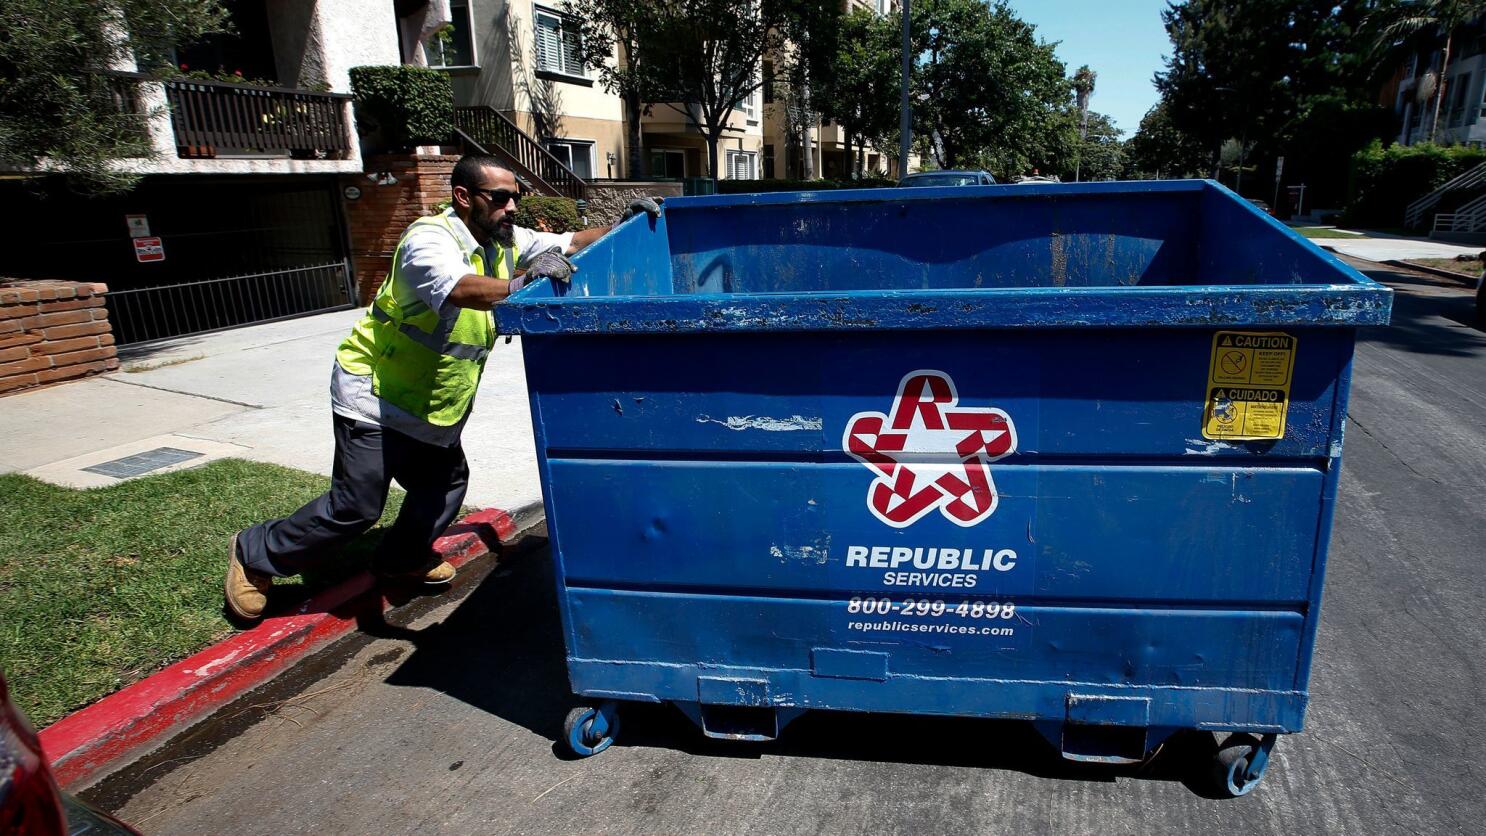 LA Times Steve Lopez learns all about recycling